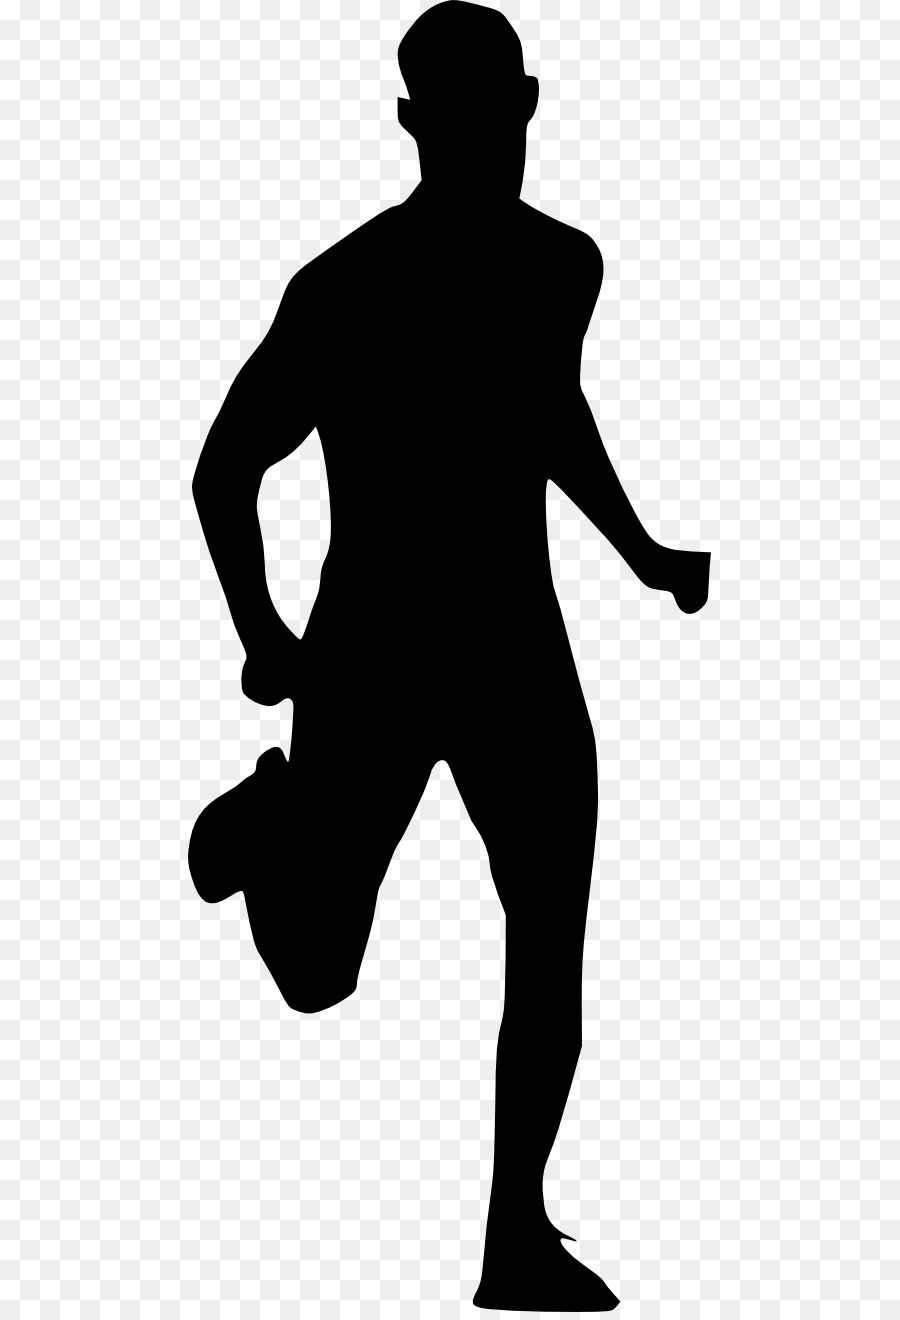 Person Silhouette Clip art - mystery person png download - 457*822 ...